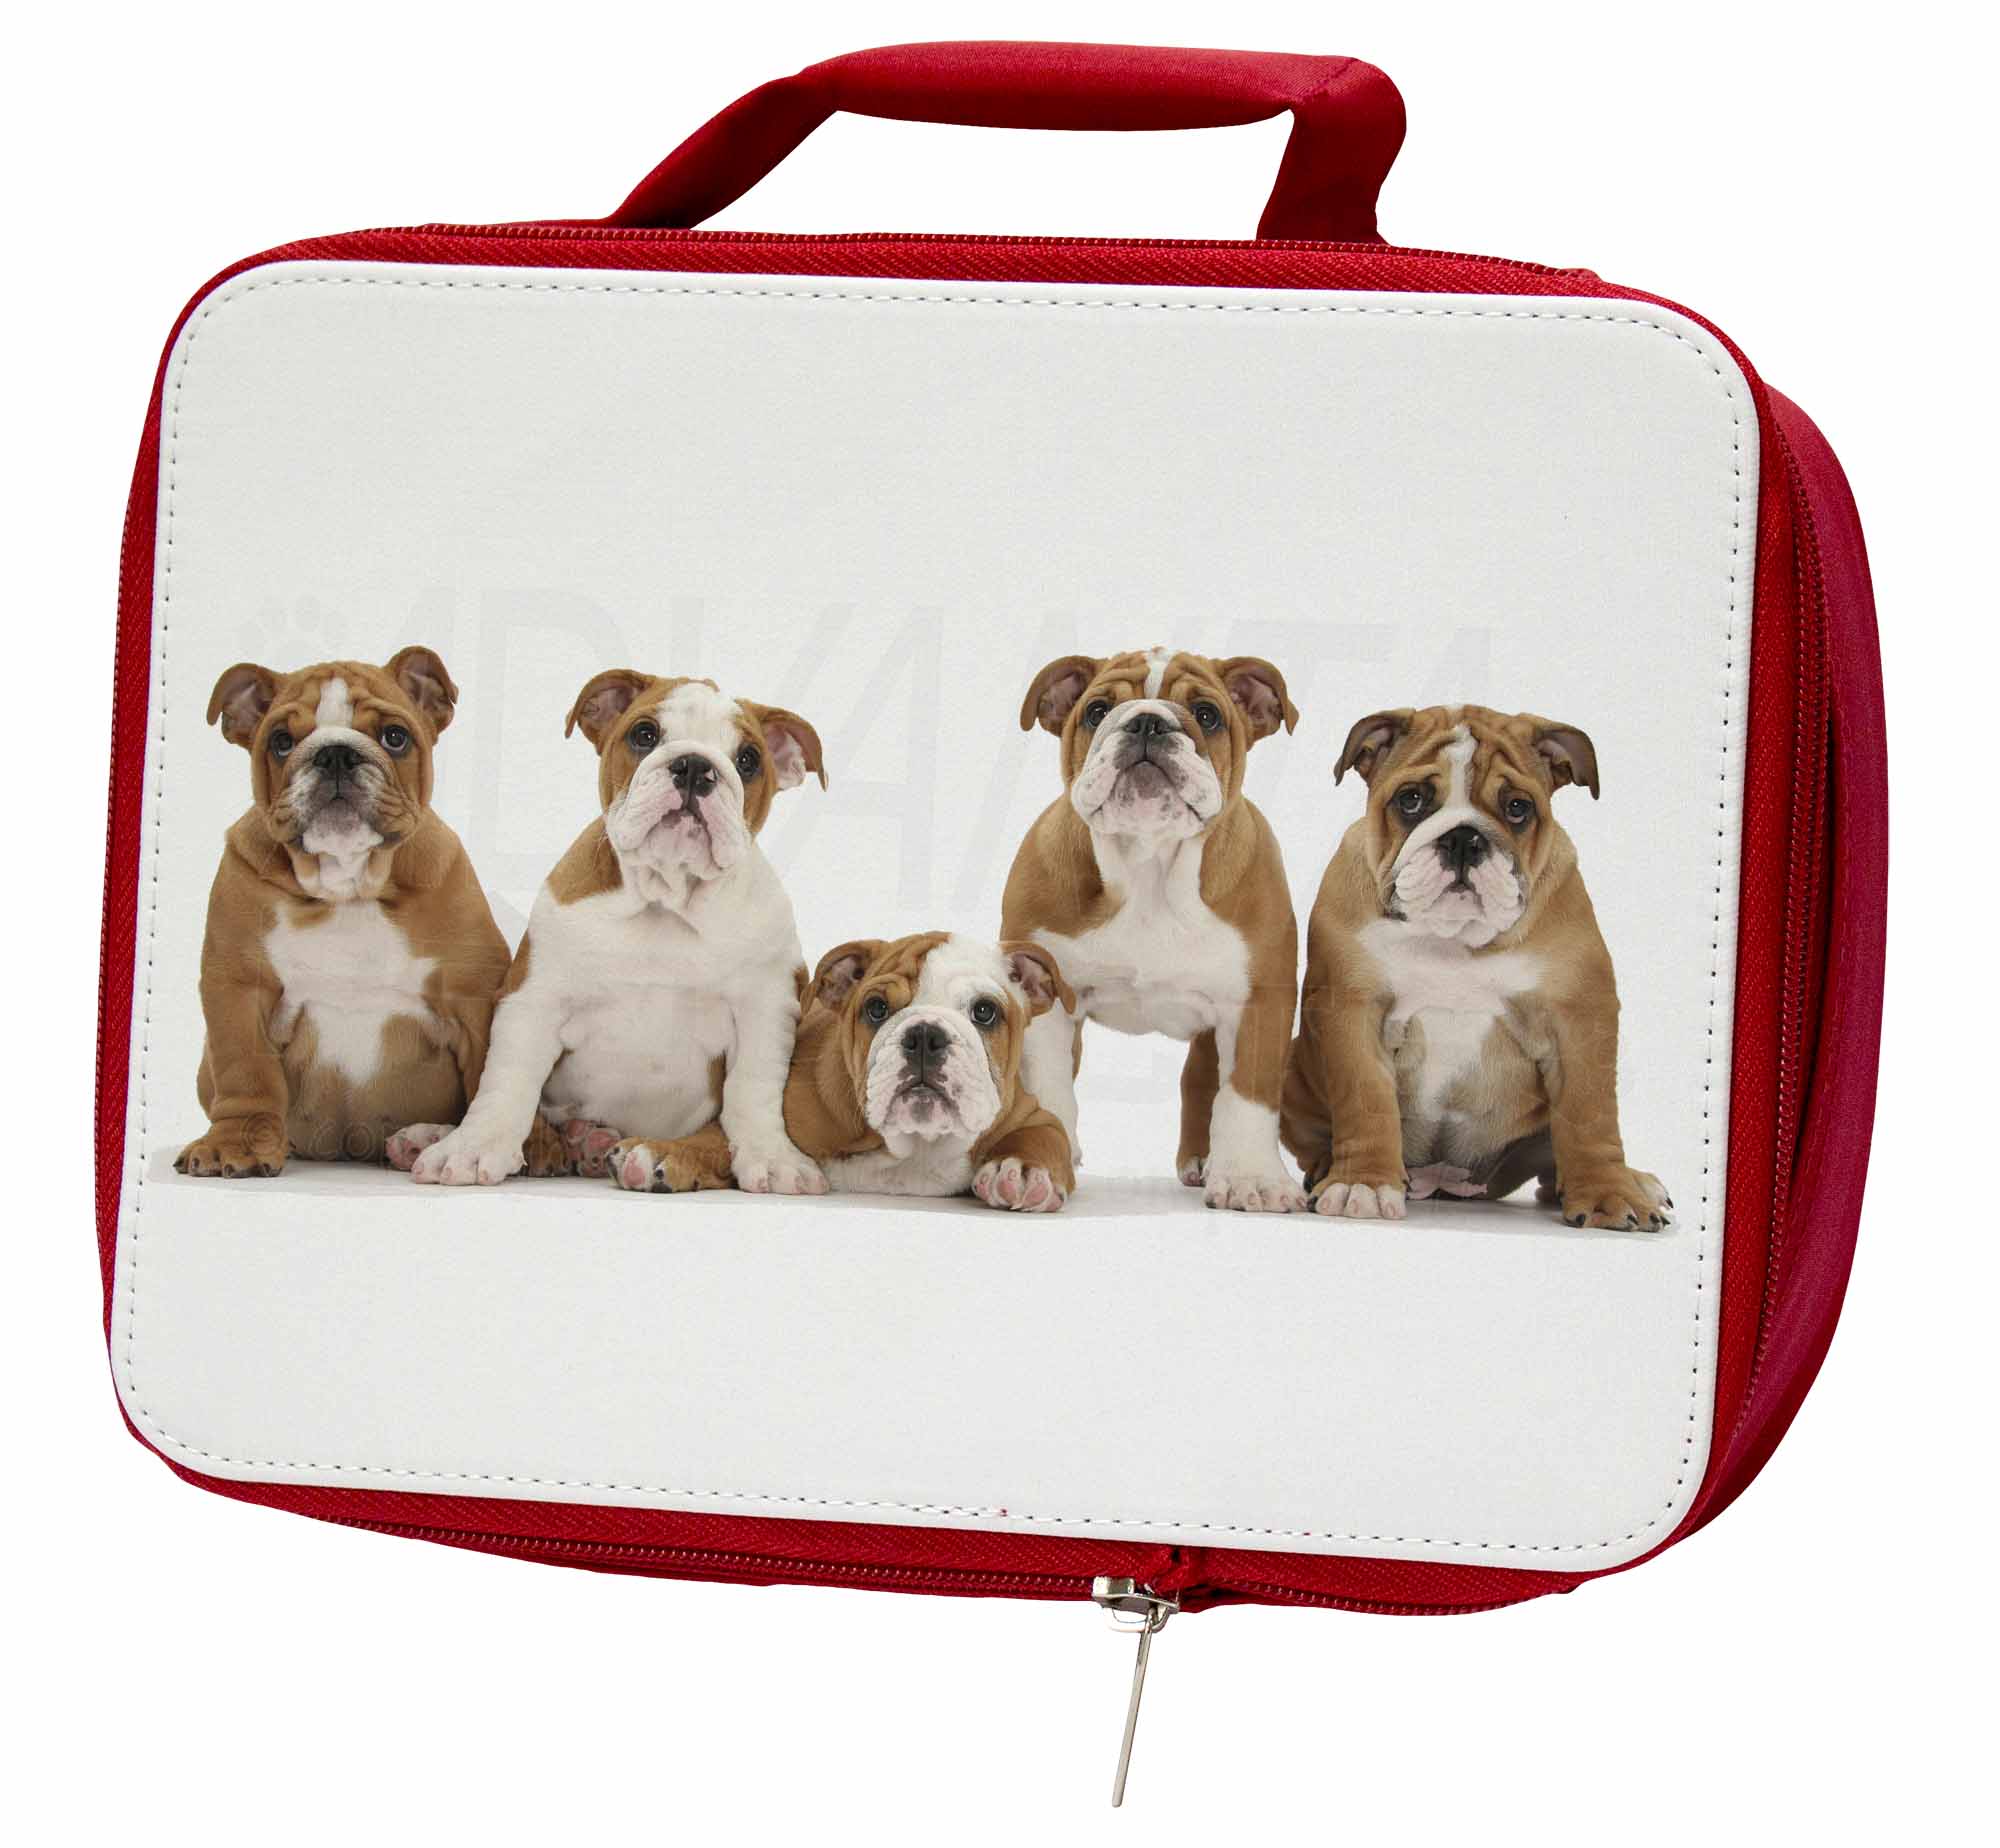 AD-BER1LBR Bernese Mountain Dog Insulated Red School Lunch Box/Picnic Bag 